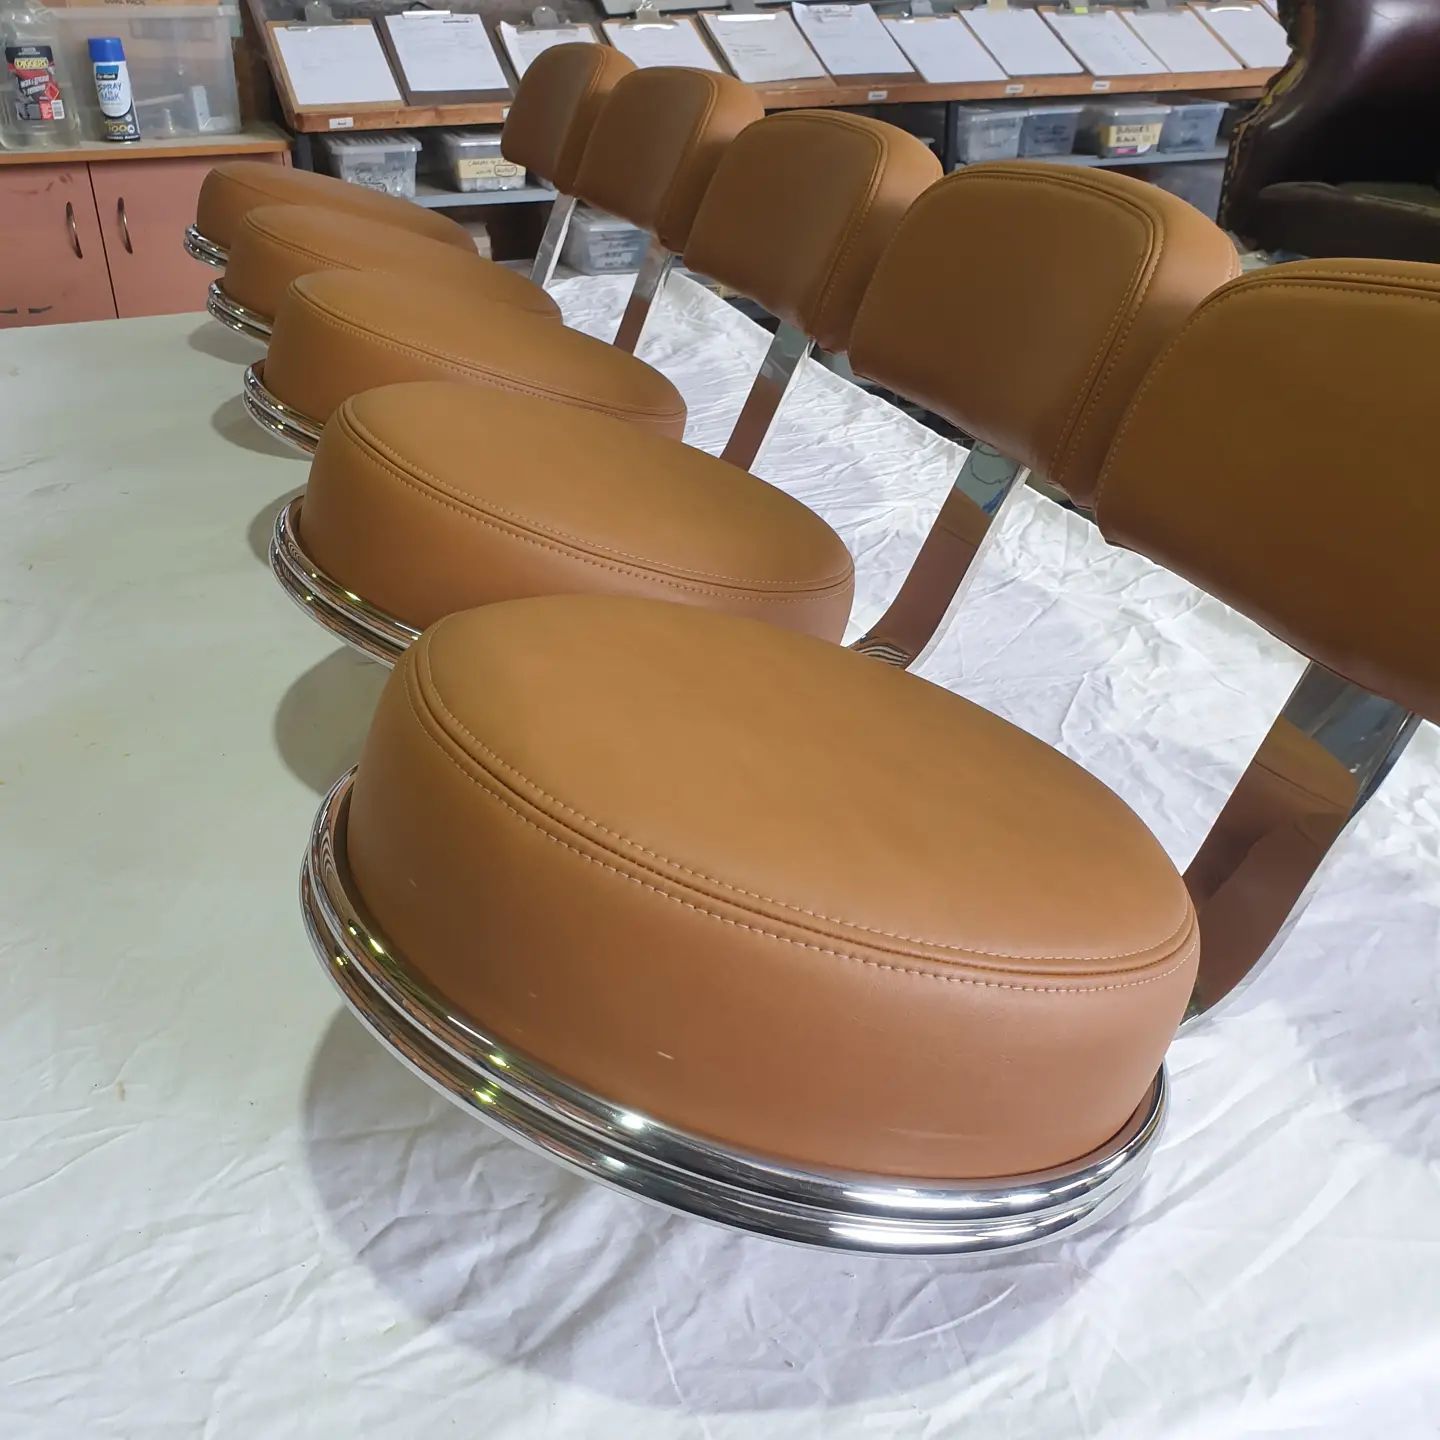 New Upholstery on the swivel chairs —New & Replacement Upholstery in Smithfield, QLD